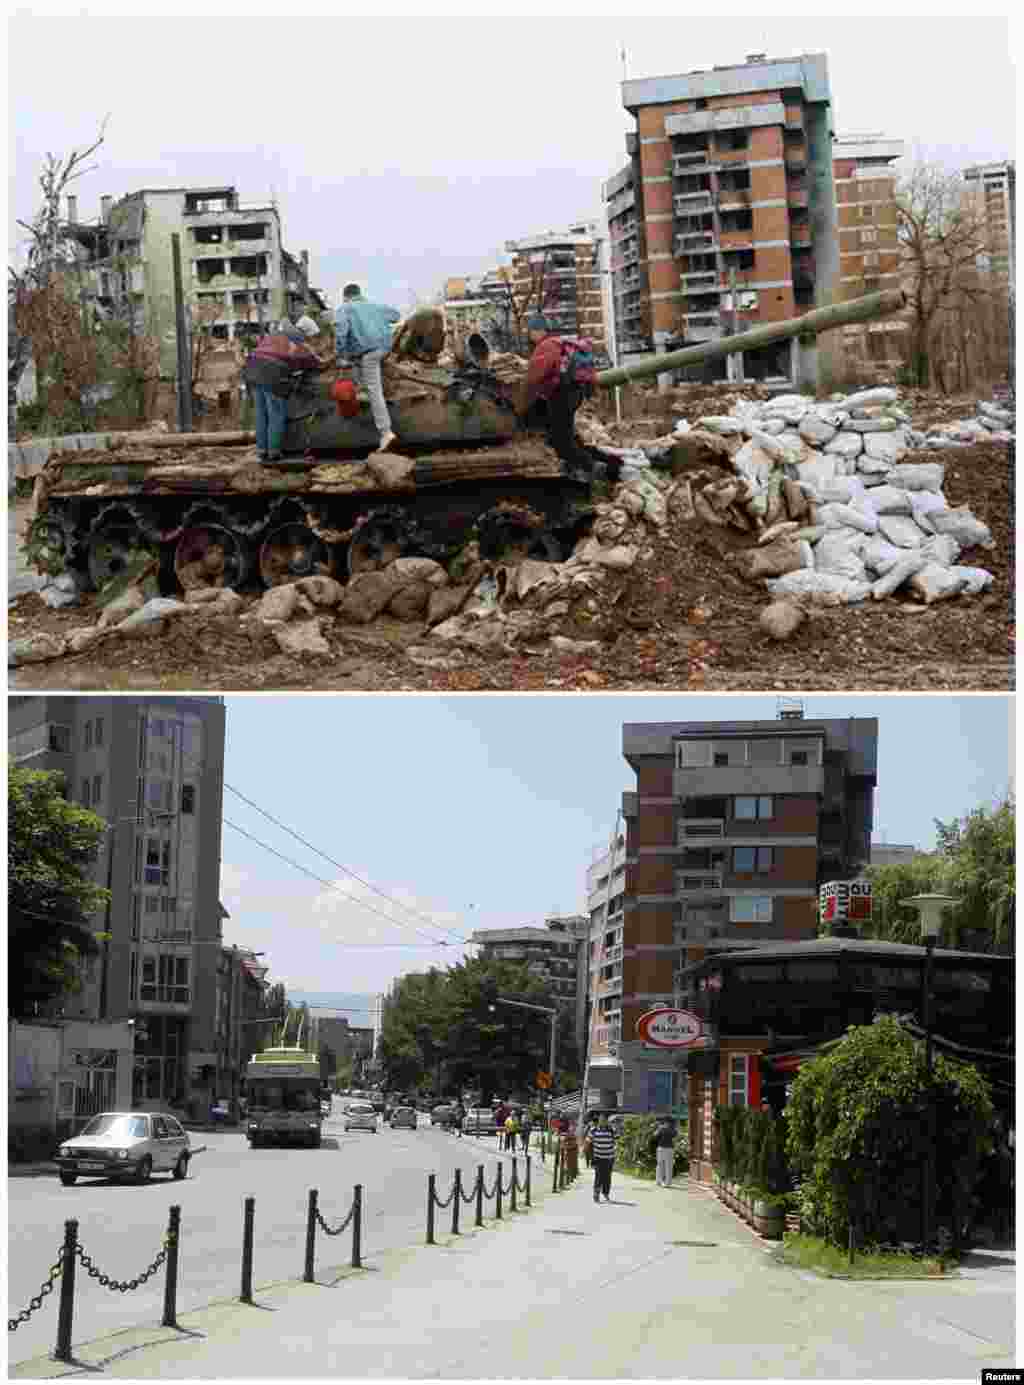 People climb on an abandoned tank standing at a crossroads in front of a ruined building in the Kovacici district in Sarajevo in February 1996. People walk along the same road on May 30, 2011.